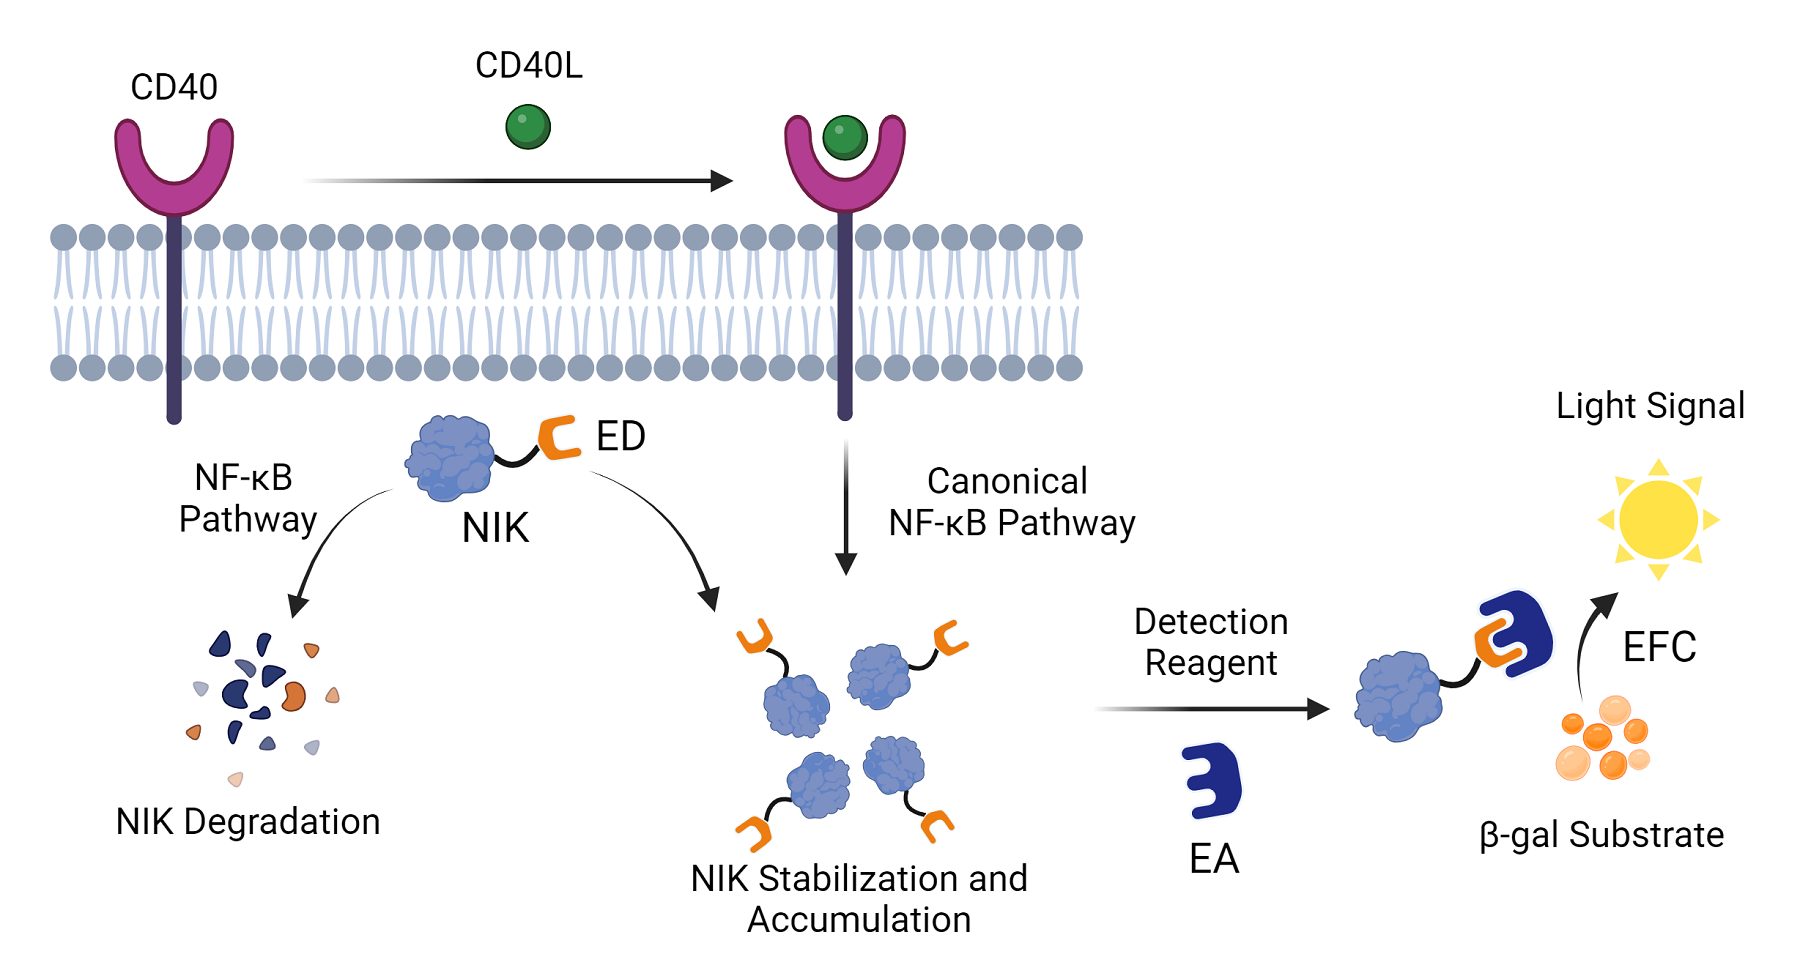 Figure 2. Enzyme Fragment Complementation Assay Design with CD40 Checkpoint Receptor.